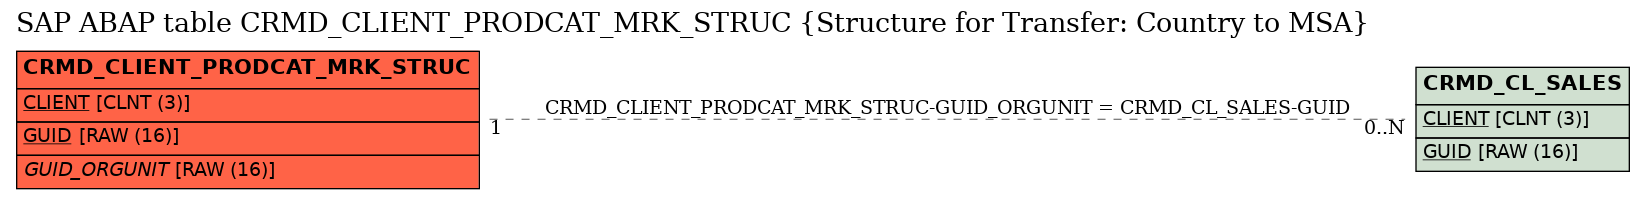 E-R Diagram for table CRMD_CLIENT_PRODCAT_MRK_STRUC (Structure for Transfer: Country to MSA)